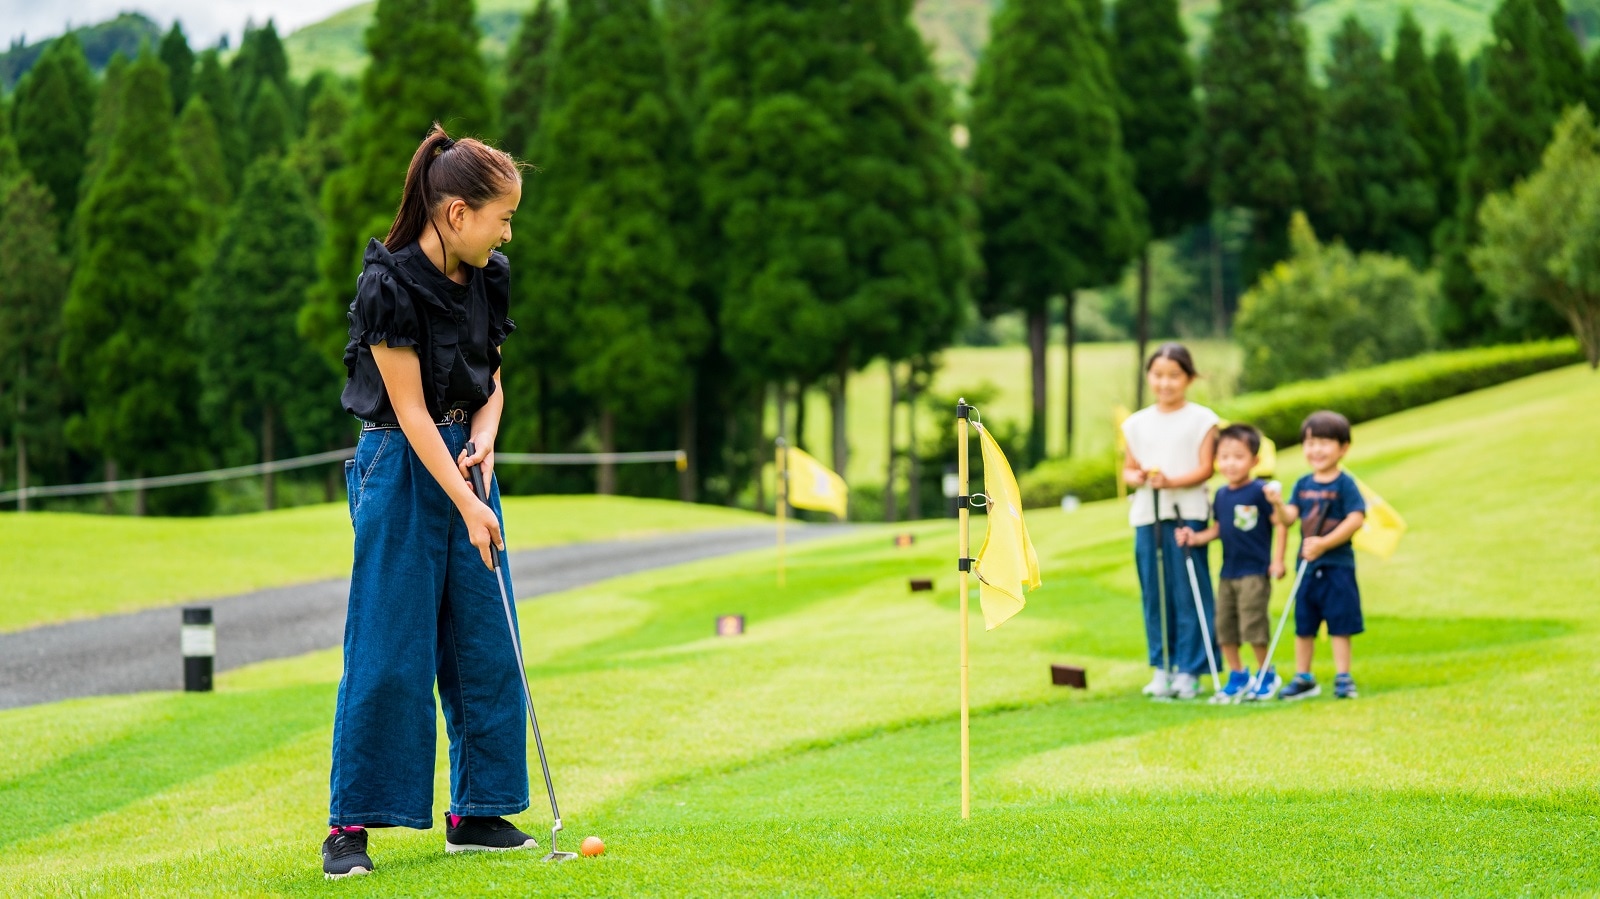 <Activity> How about playing putter golf with your family?